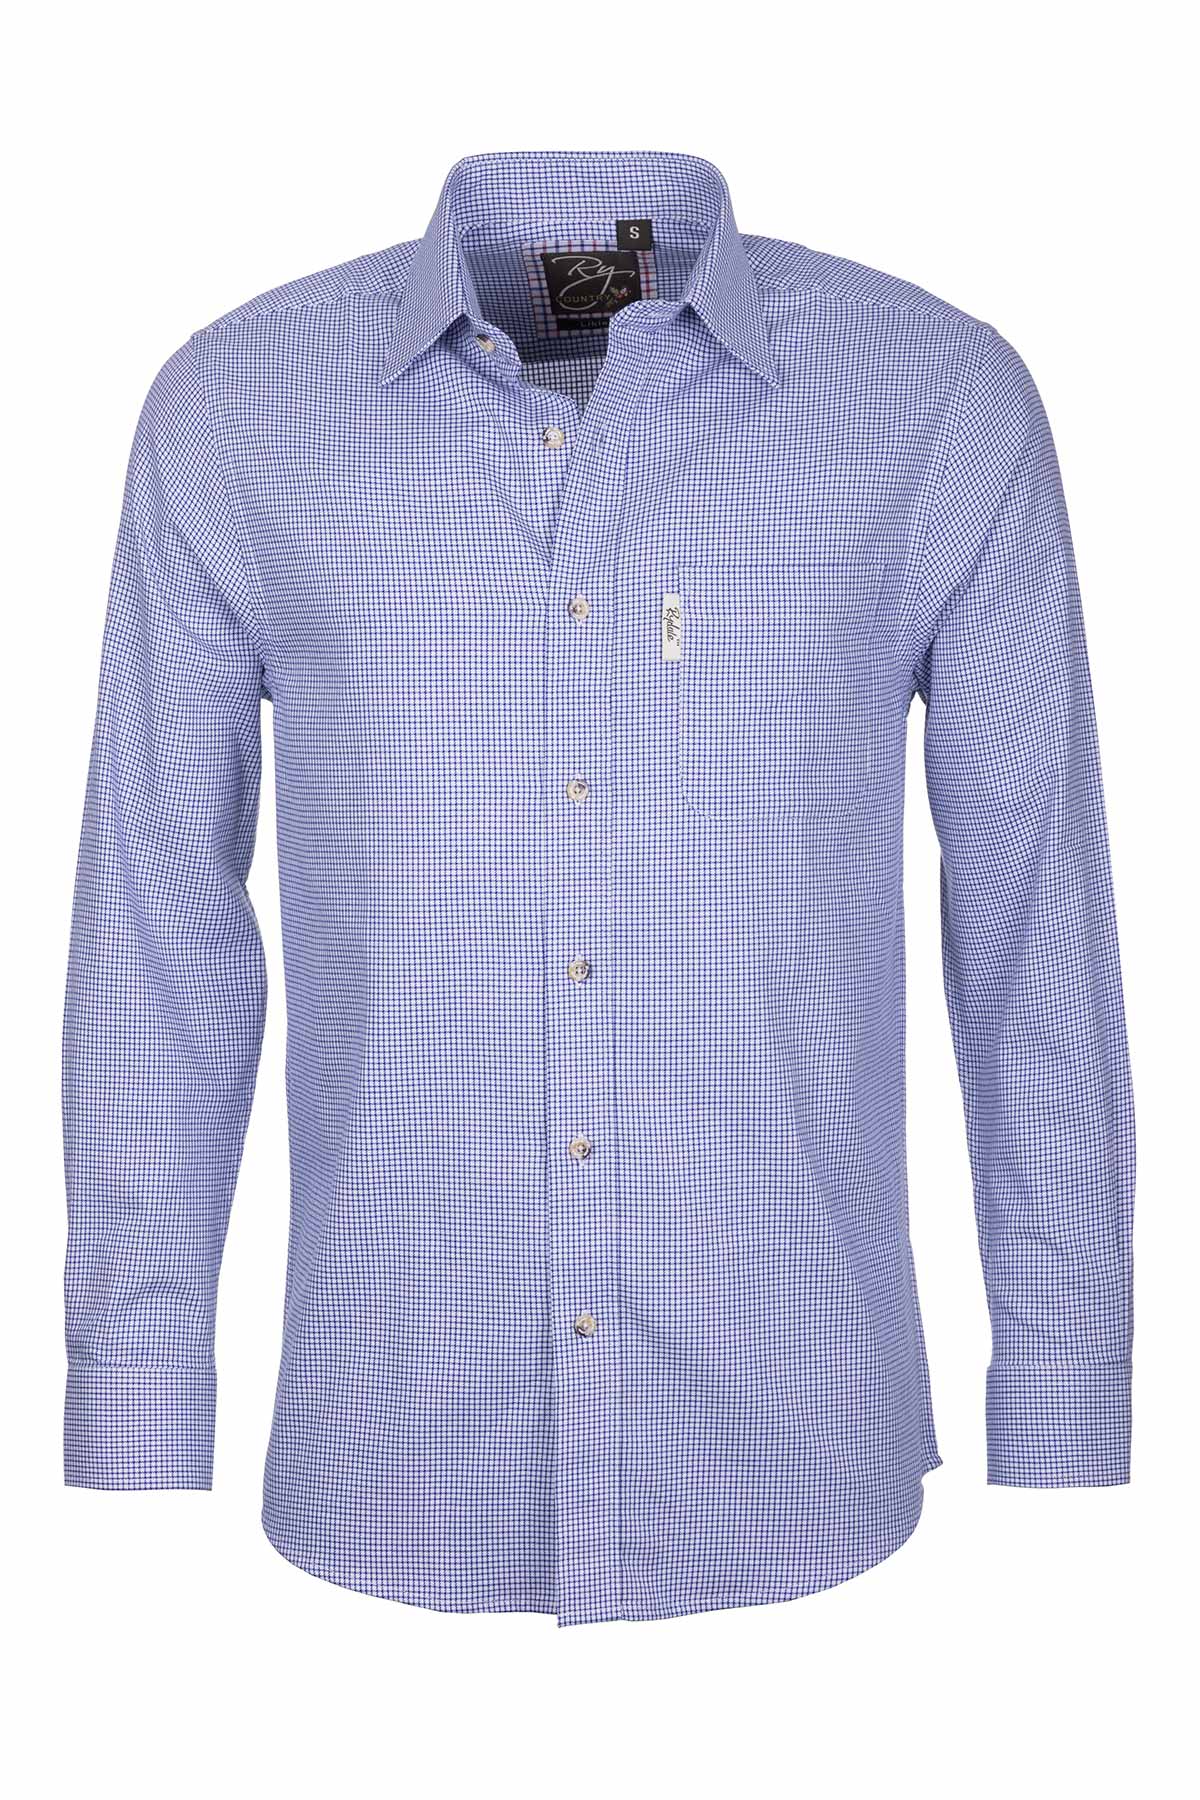 Mens Country Check Shirts UK | Rydale